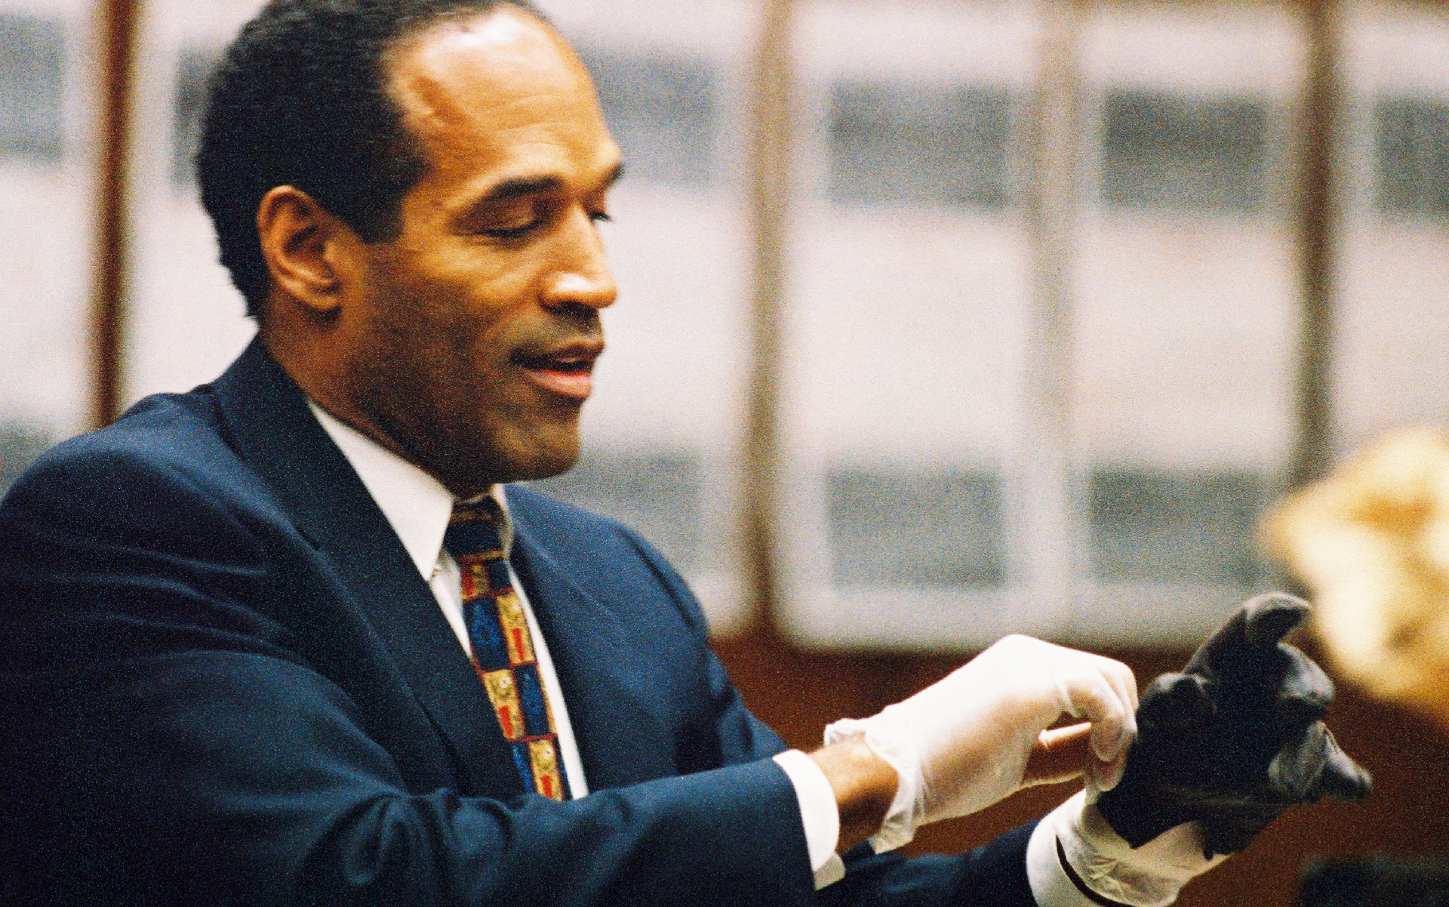 O.J. Simpson tries on glove during trial